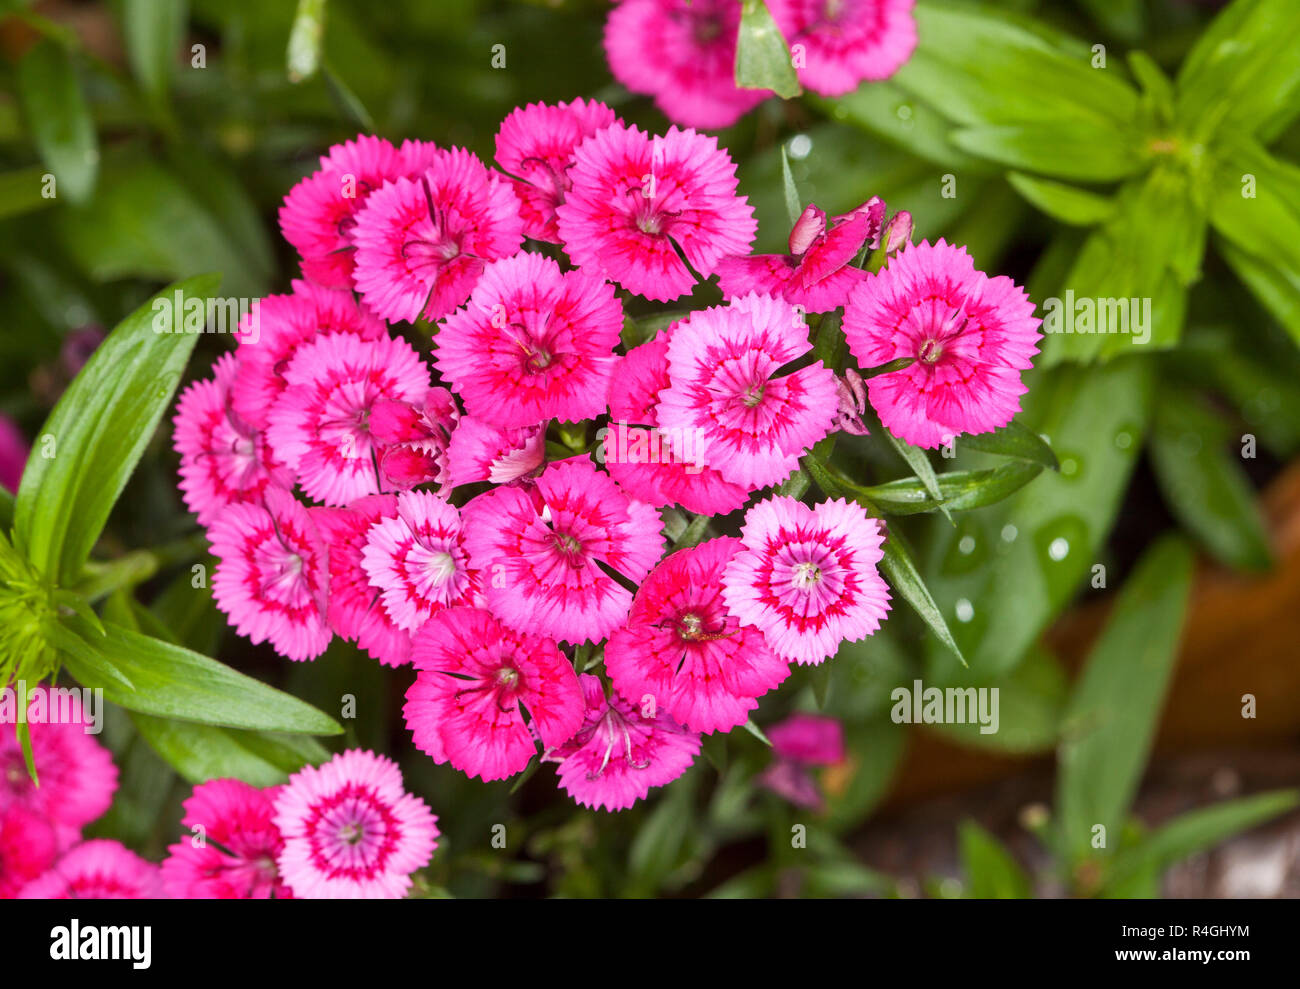 Cluster of bright pink dianthus flowers, Sweet William, on background of green foliage Stock Photo